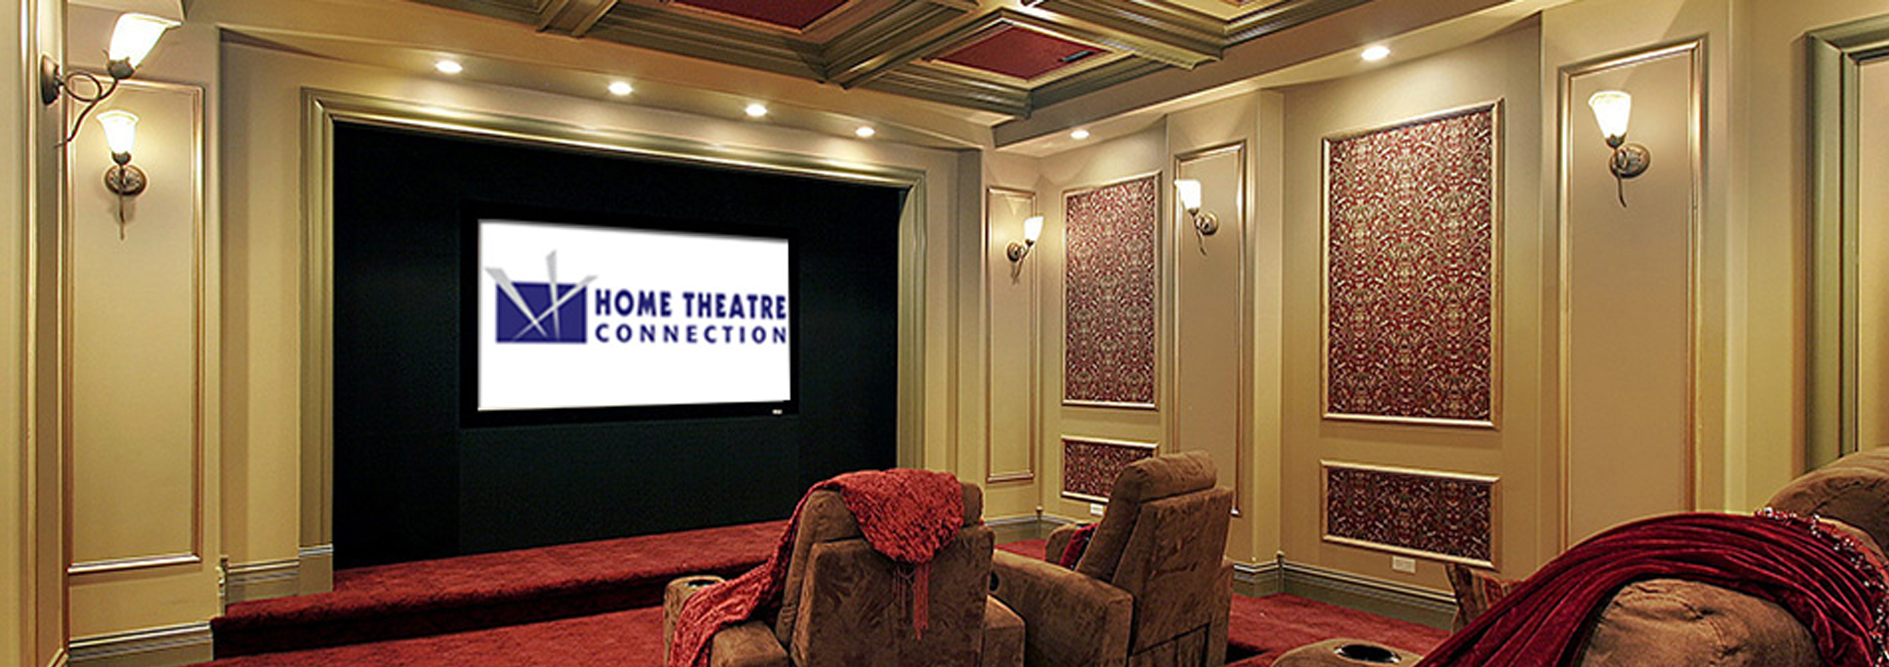 Home Theater Installation Home Automation System Home Audio System